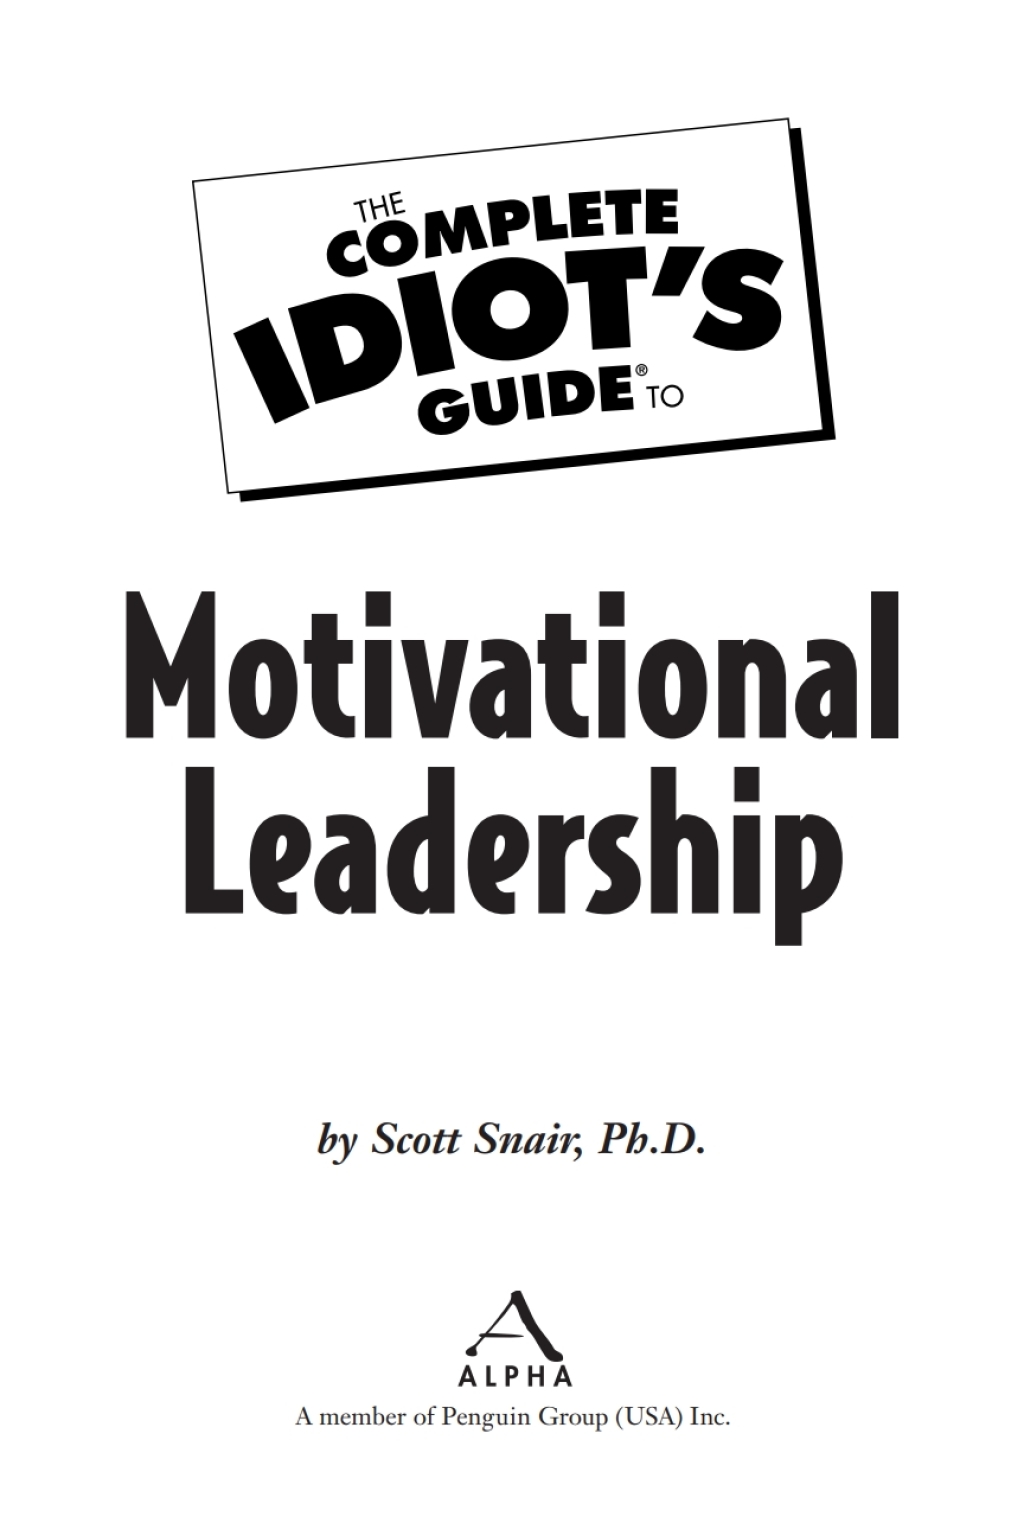 The Complete Idiot's Guide to Motivational Leadership (eBook) - Scott Snair;  Ph.D.,